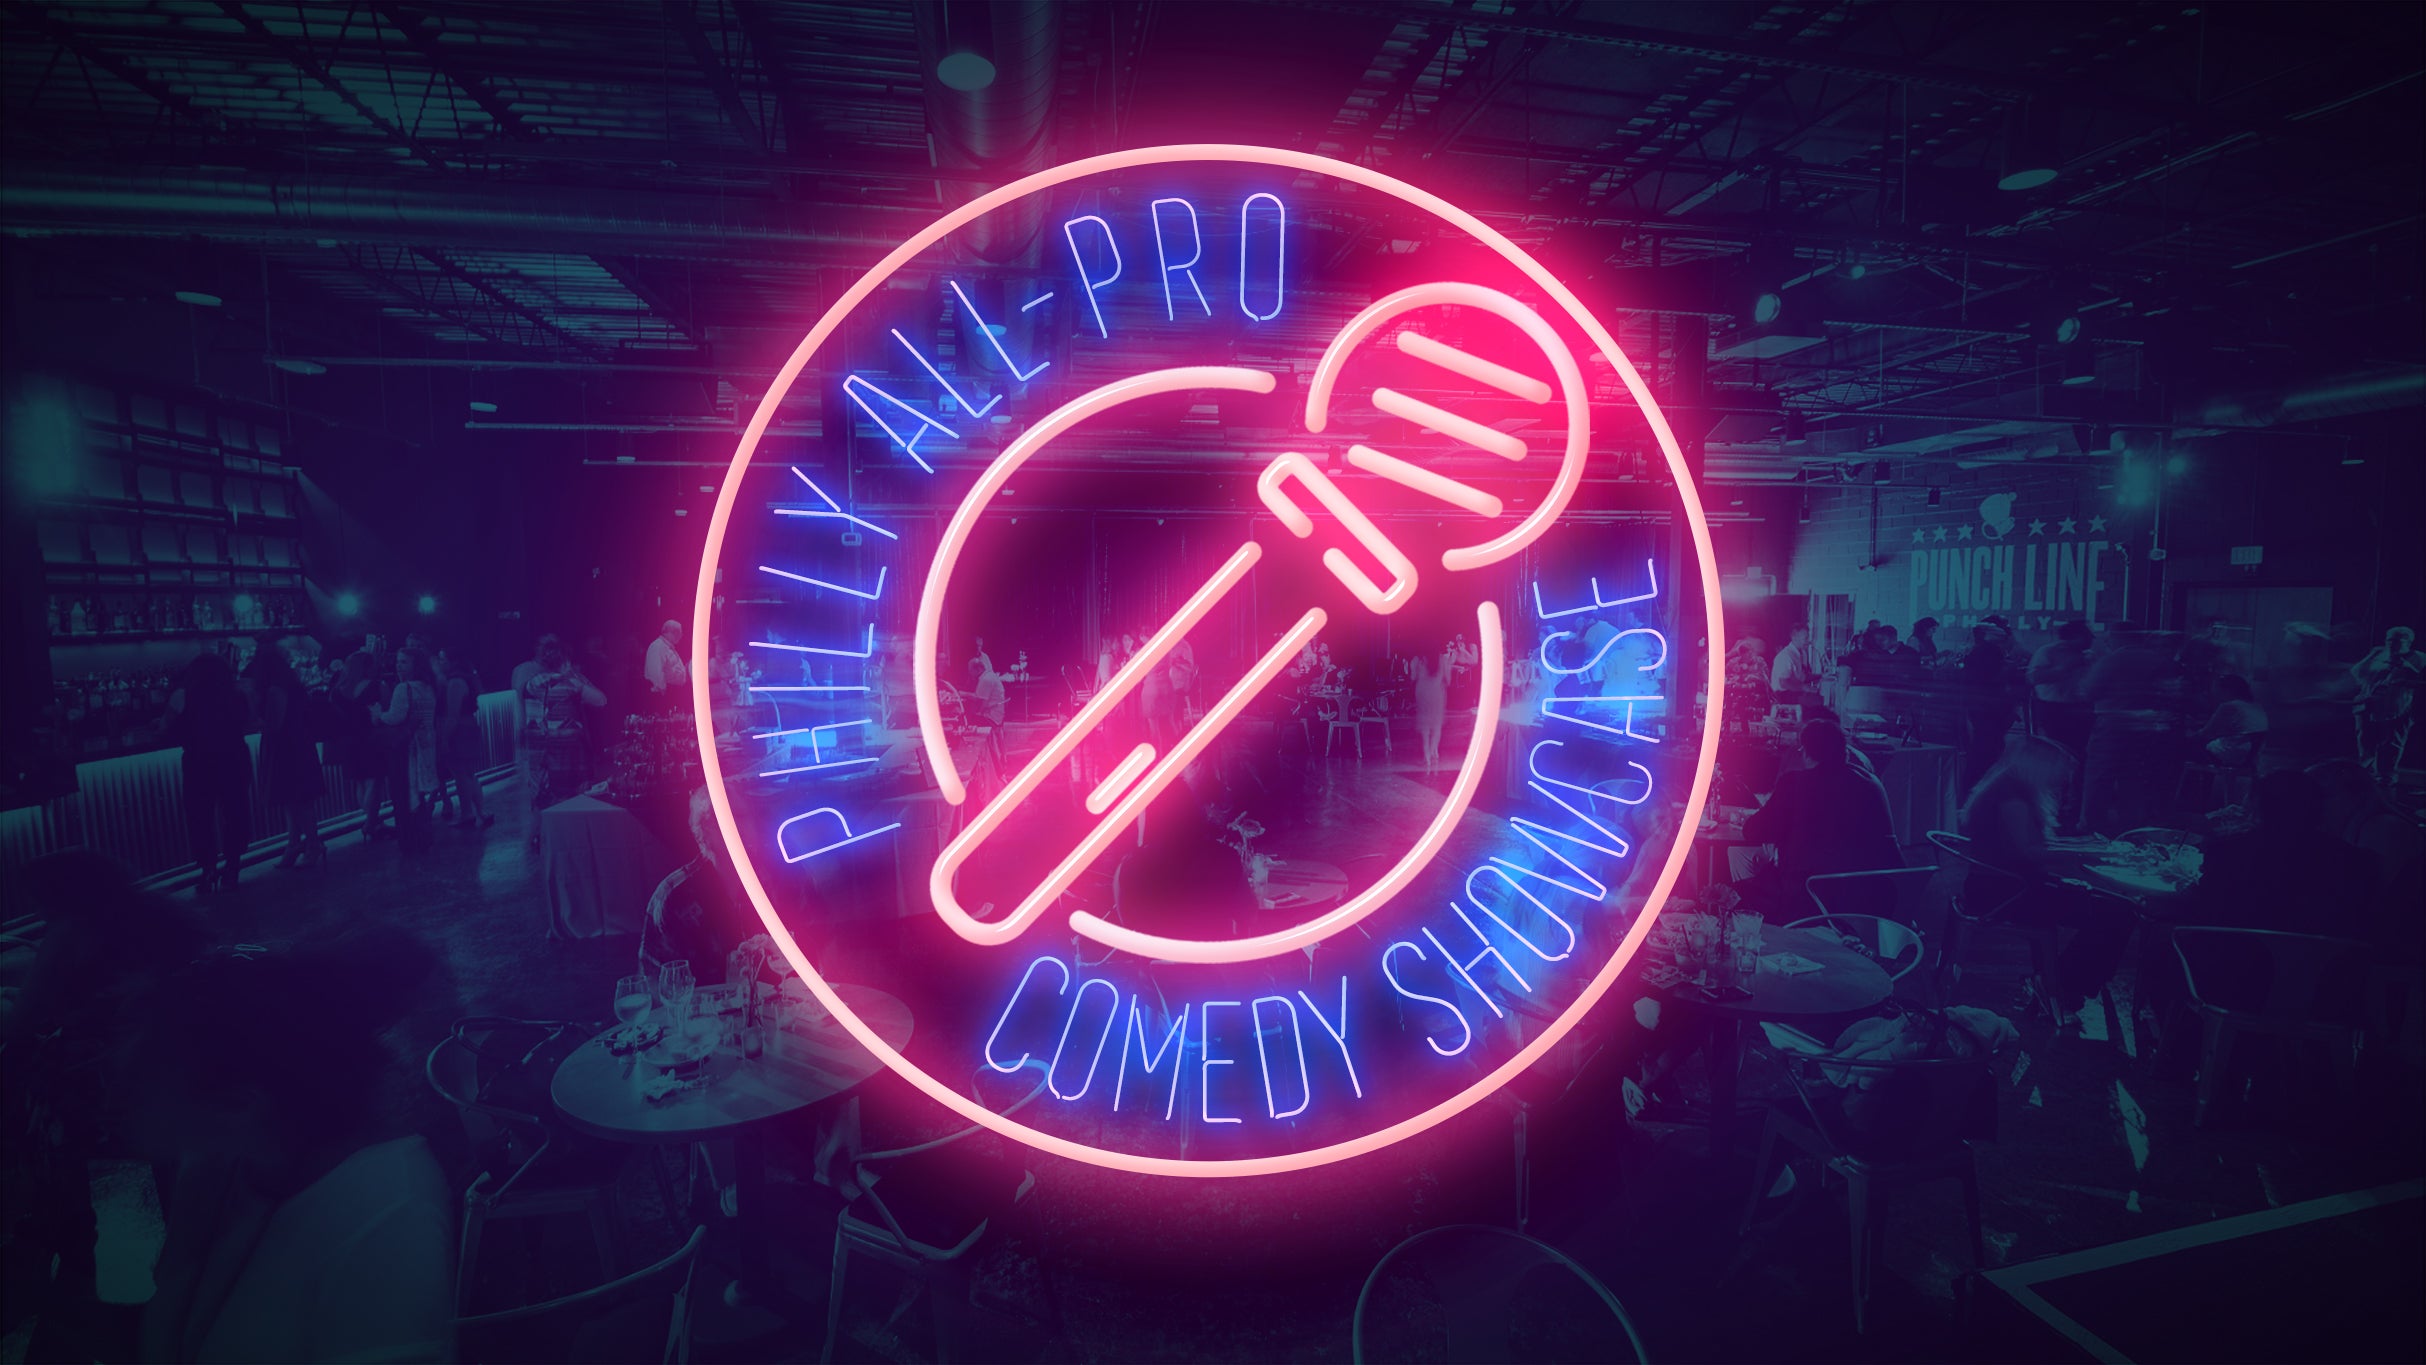 Philly All-Pro Comedy Showcase at Punch Line Philly